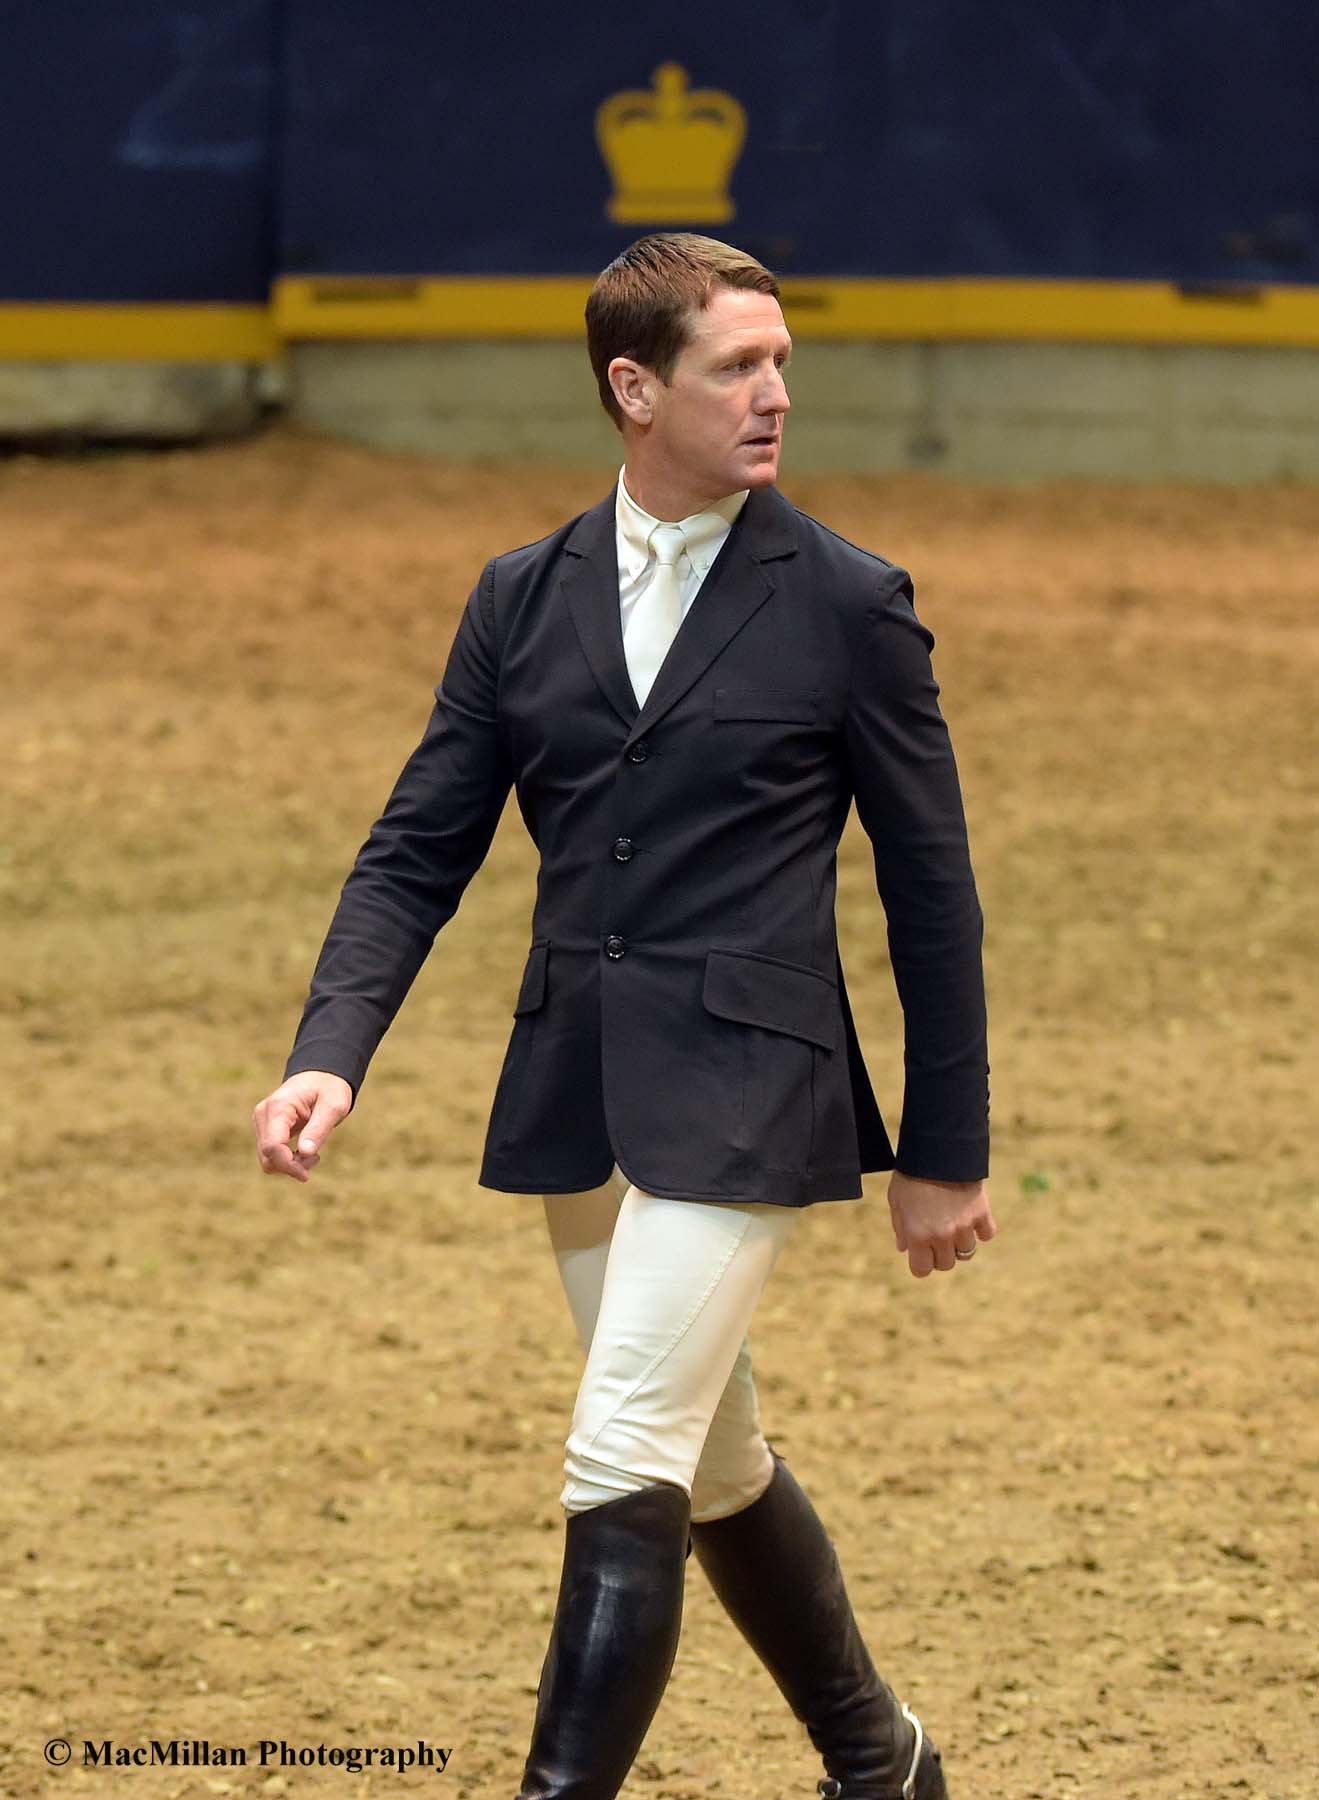 Photo 2 – U.S. Olympic rider McLain Ward walking the course for the $75,000 Big Ben Challenge jumper class sponsored by Hudson’s Bay Company. He rode HH Azur owned by Double H Farms to win the class. Photo by Kim MacMillan/MacMillan Photography